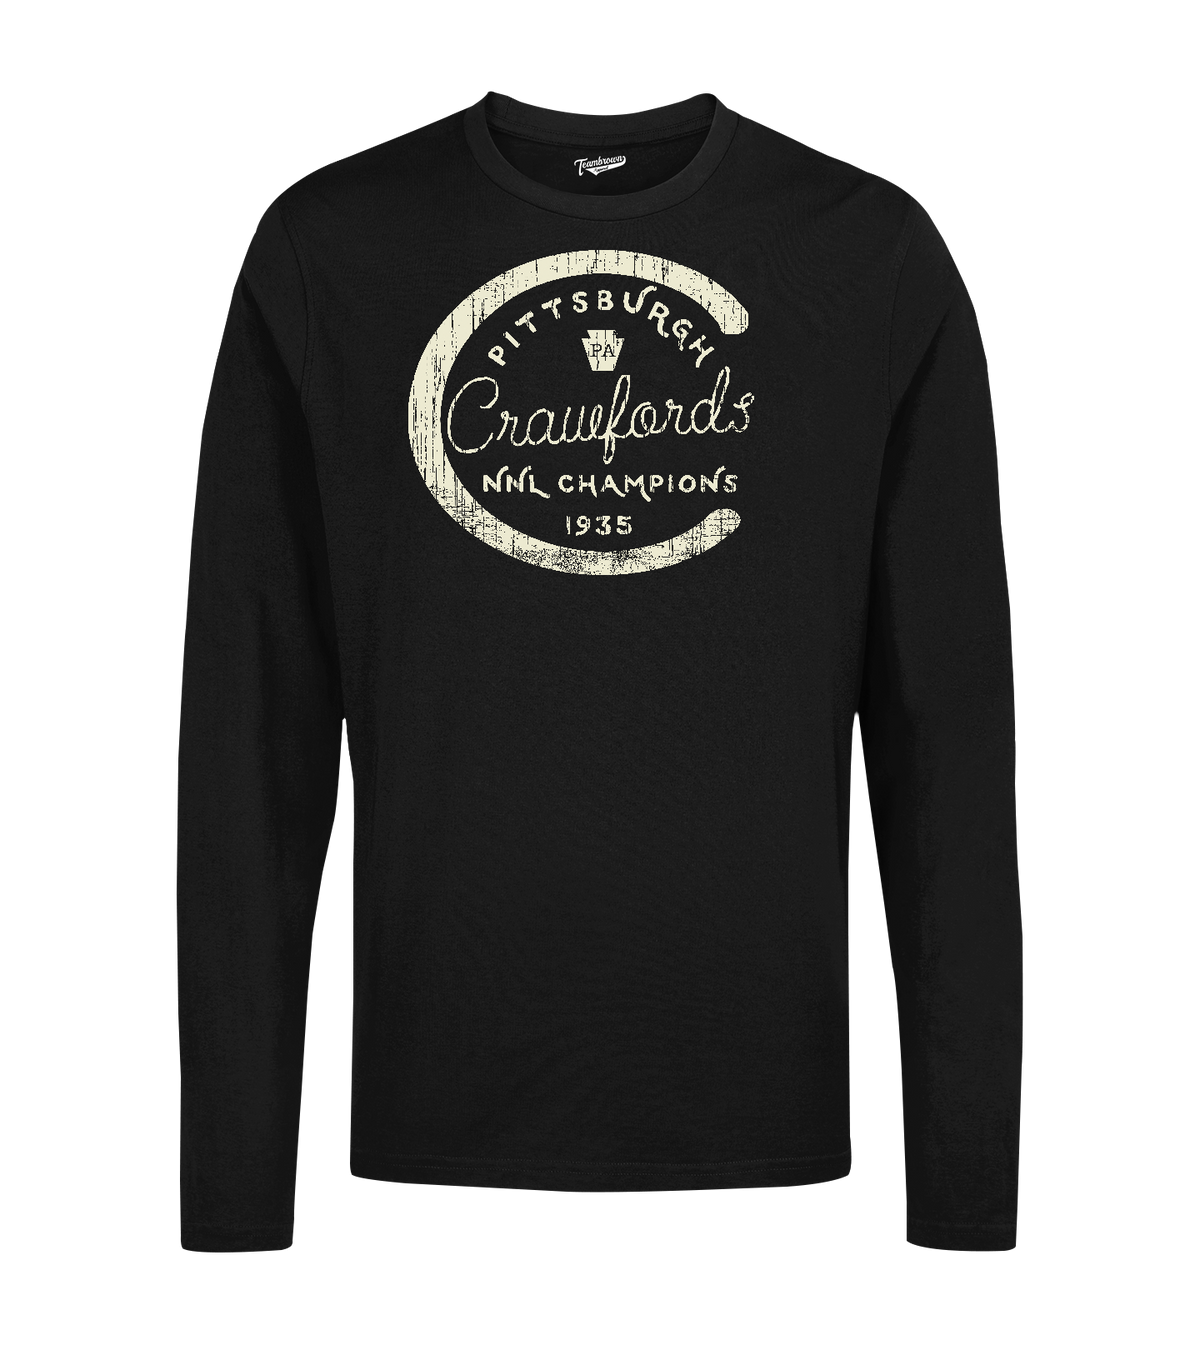 1935 Champions - Pittsburgh Crawfords - Unisex Long Sleeve Crew T-Shirt | Officially Licensed - NLBM